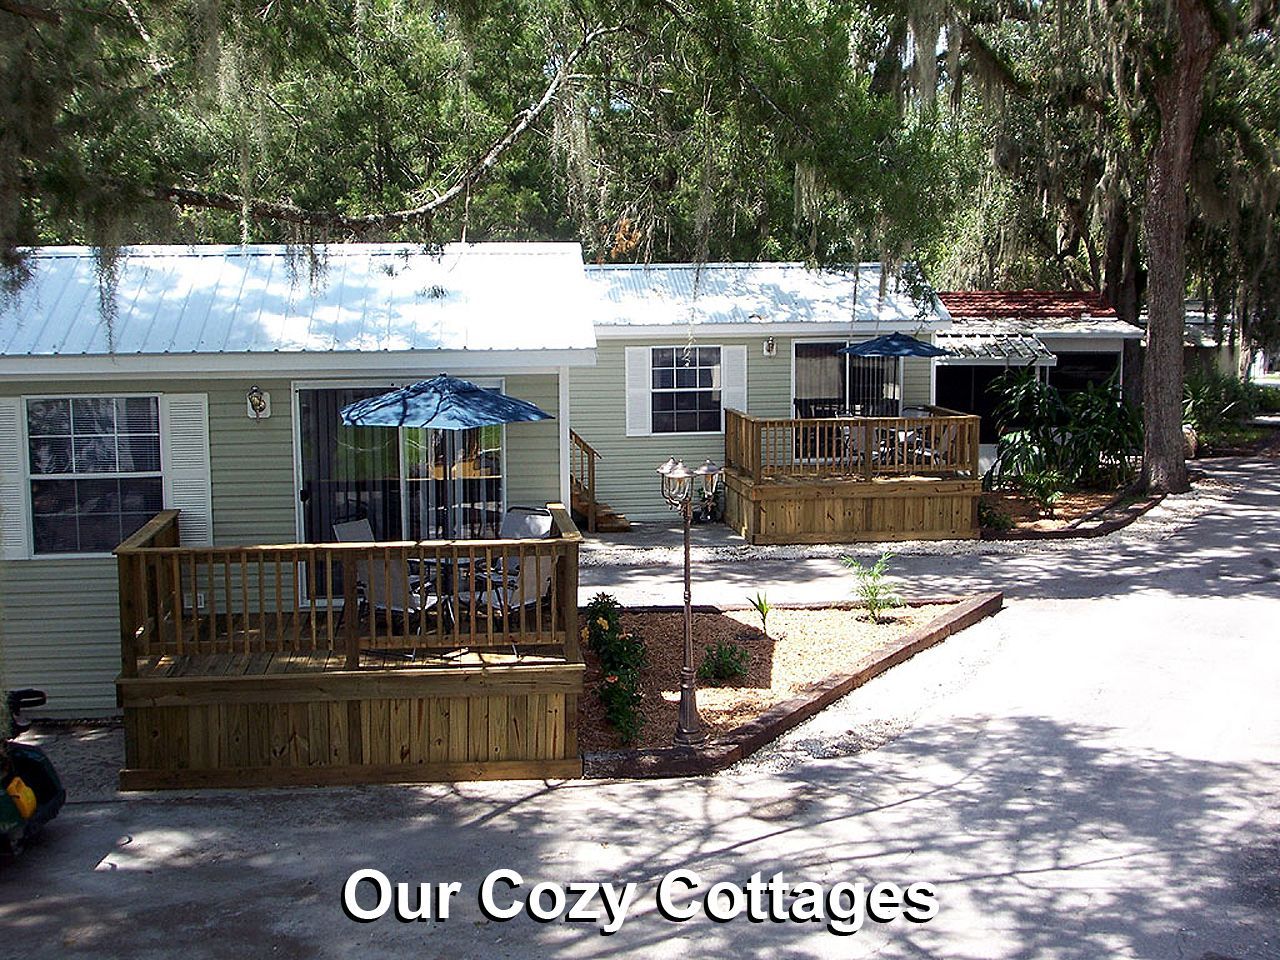 a picture of our cozy cottages is shown